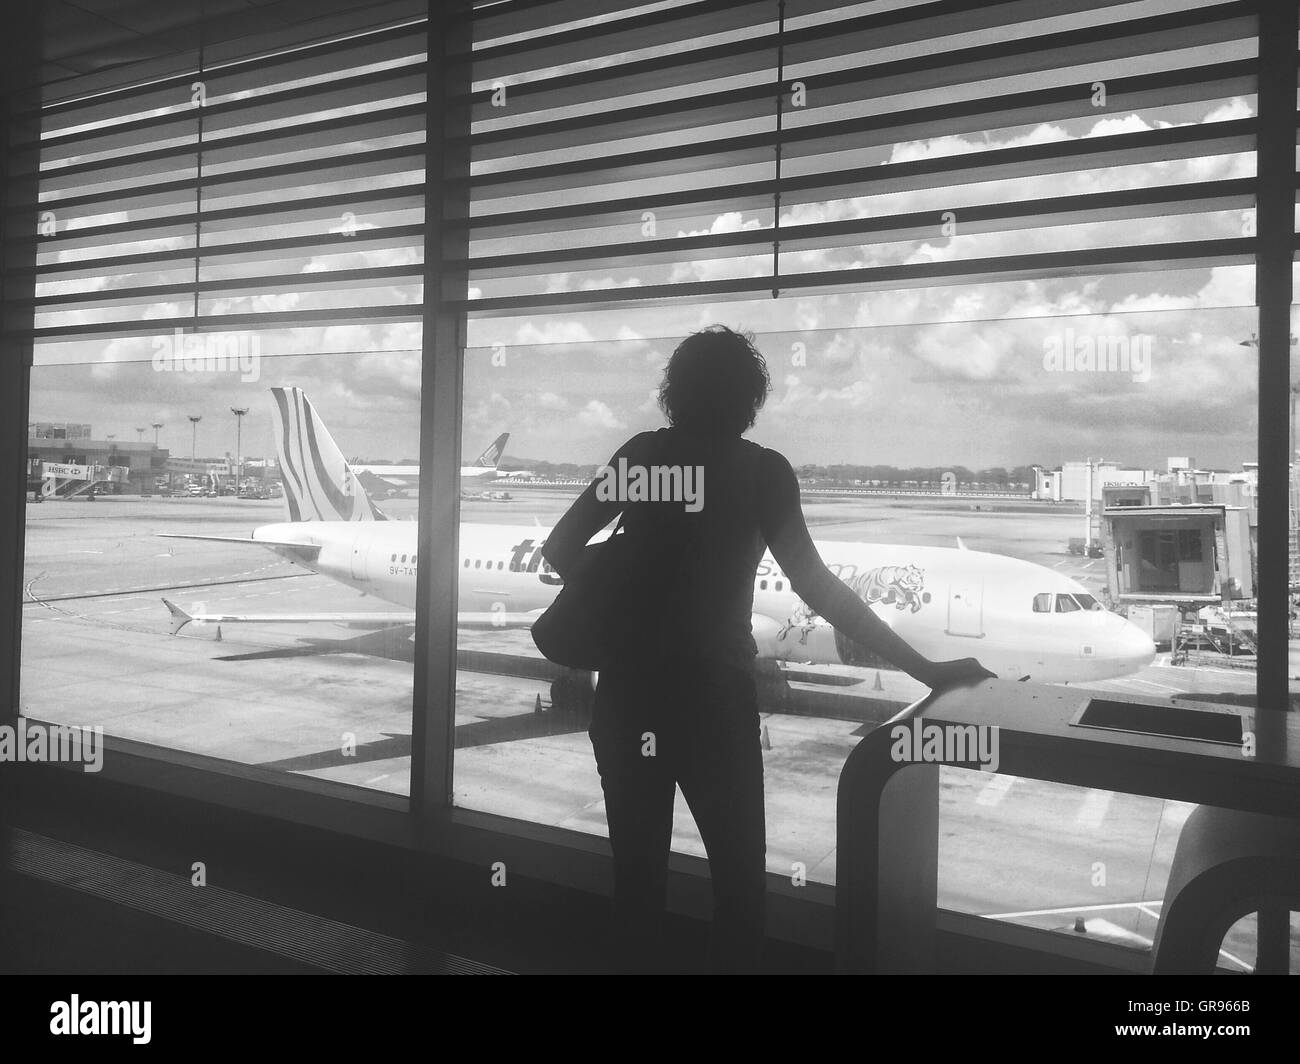 Rear View Of Woman Looking At Airplane On Runway Through Glass Window At Airport Stock Photo